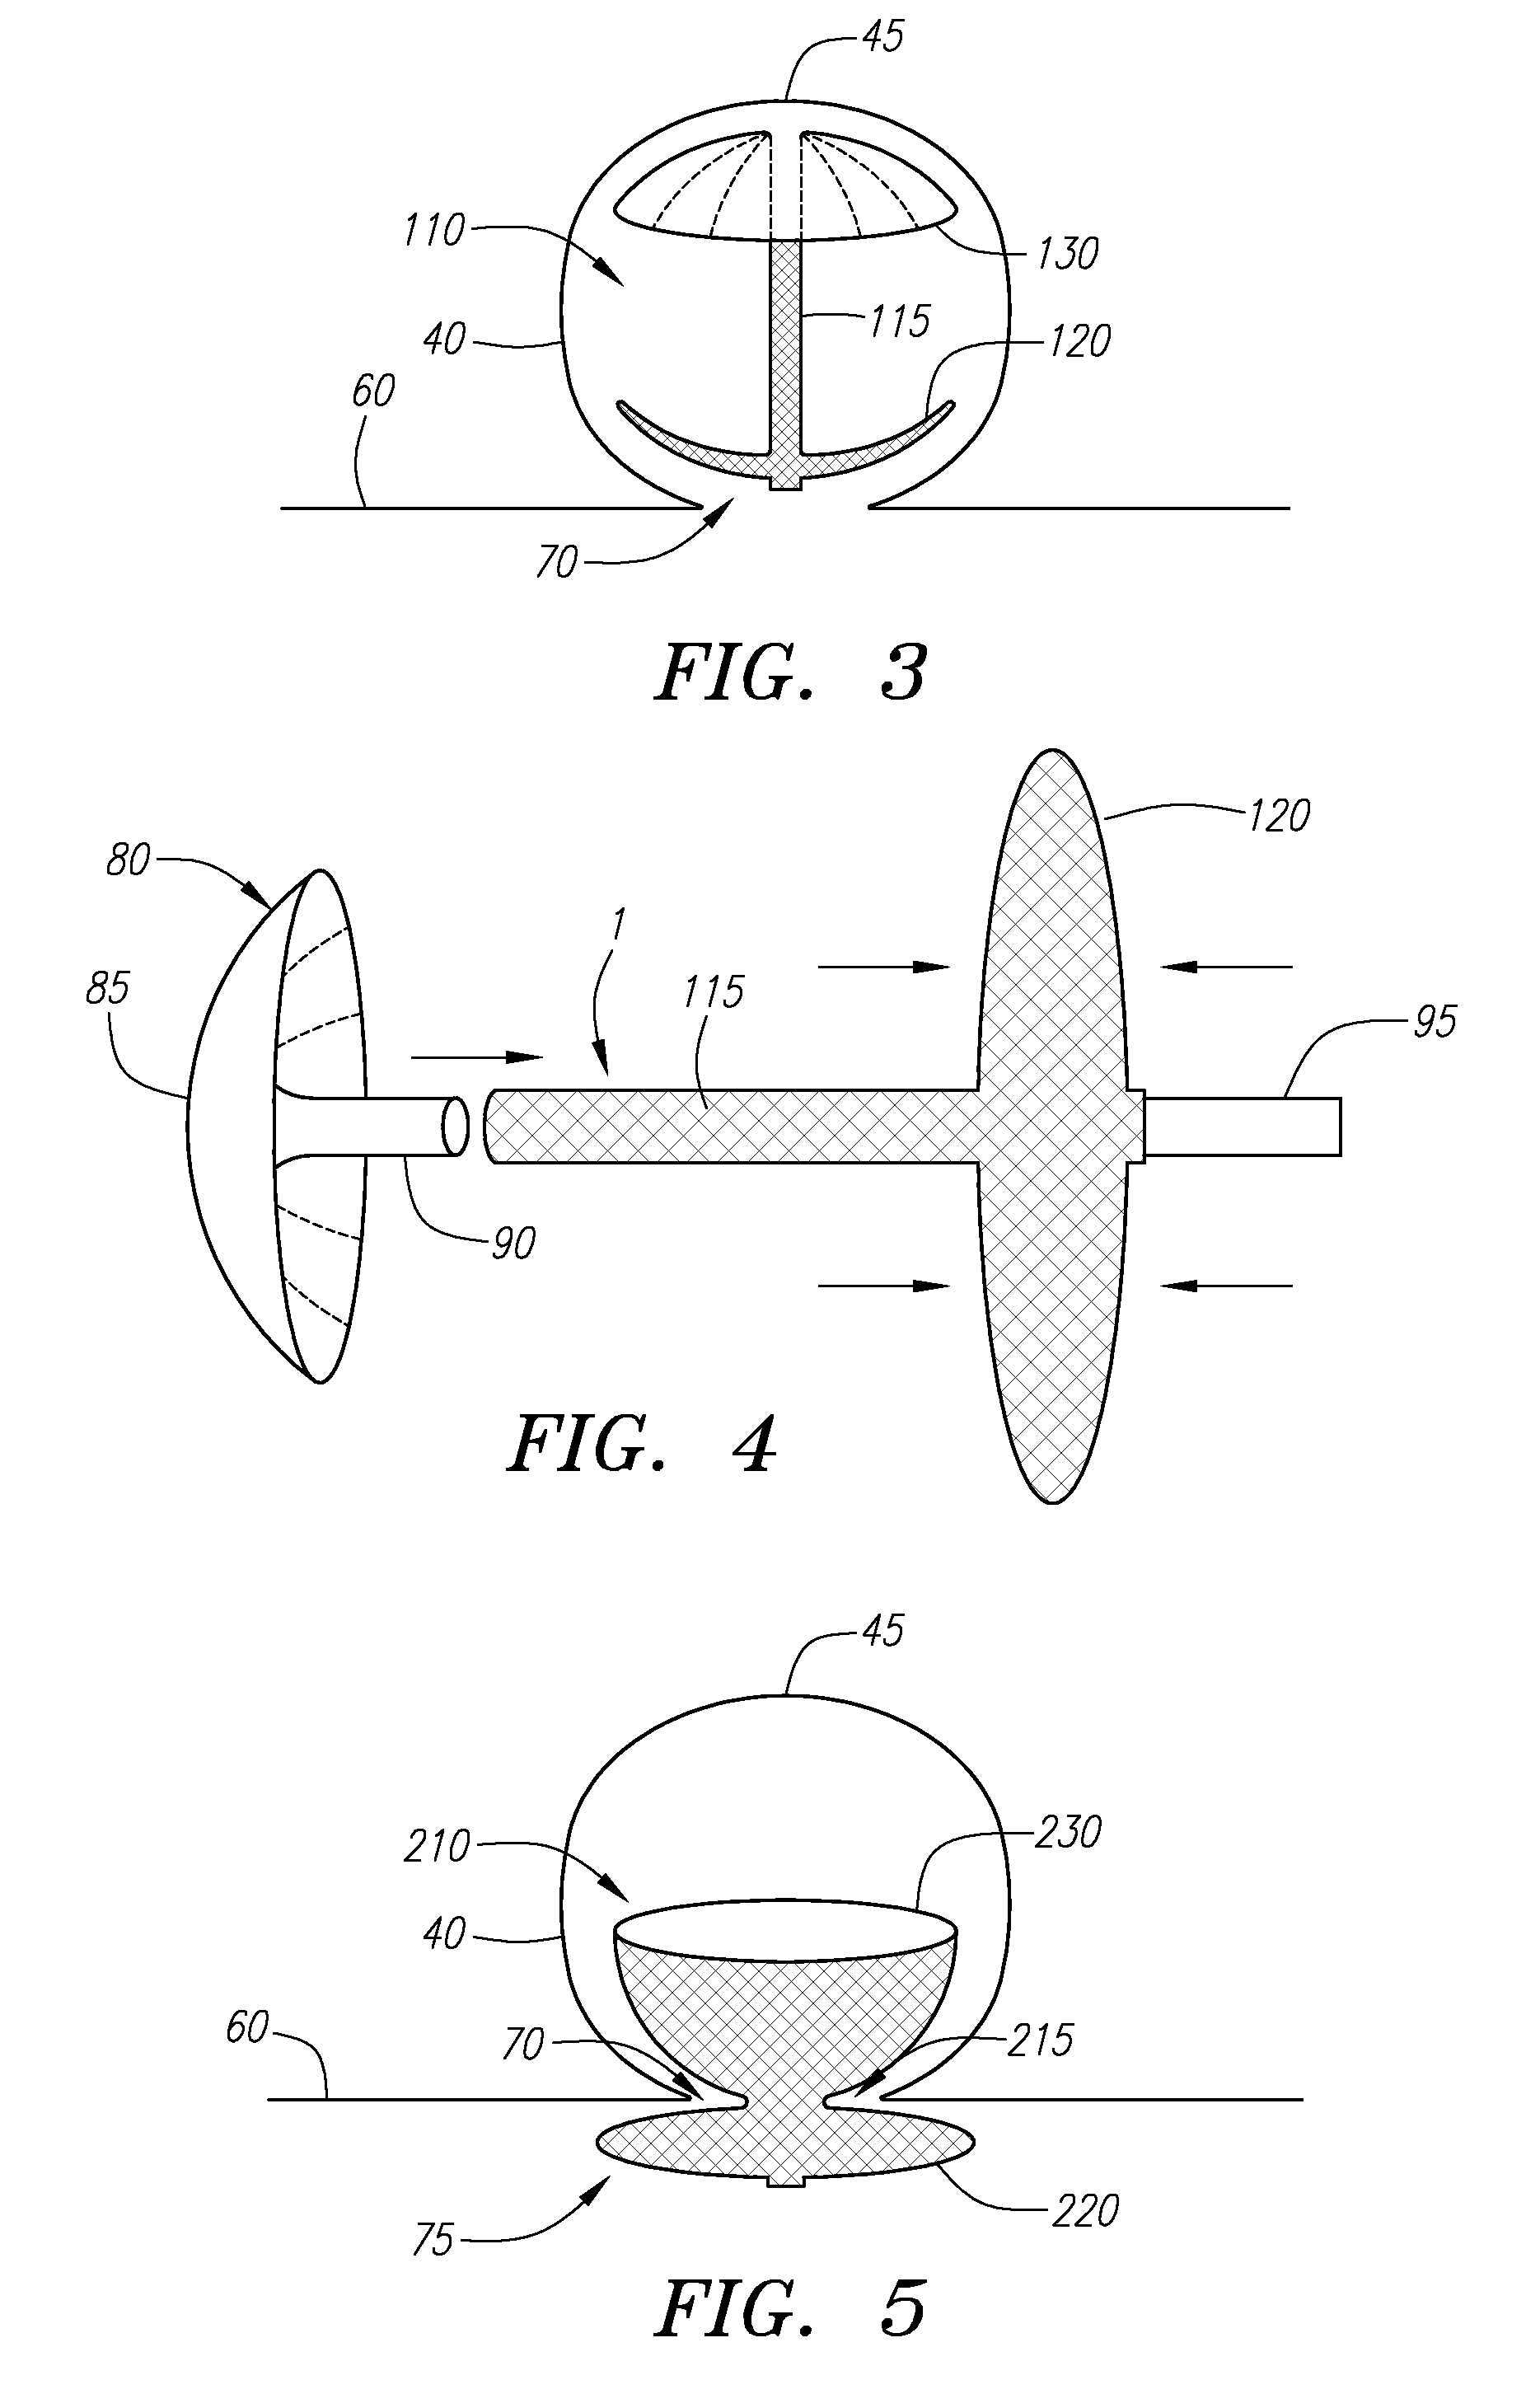 System and method for retaining vaso-occlusive devices within an aneurysm